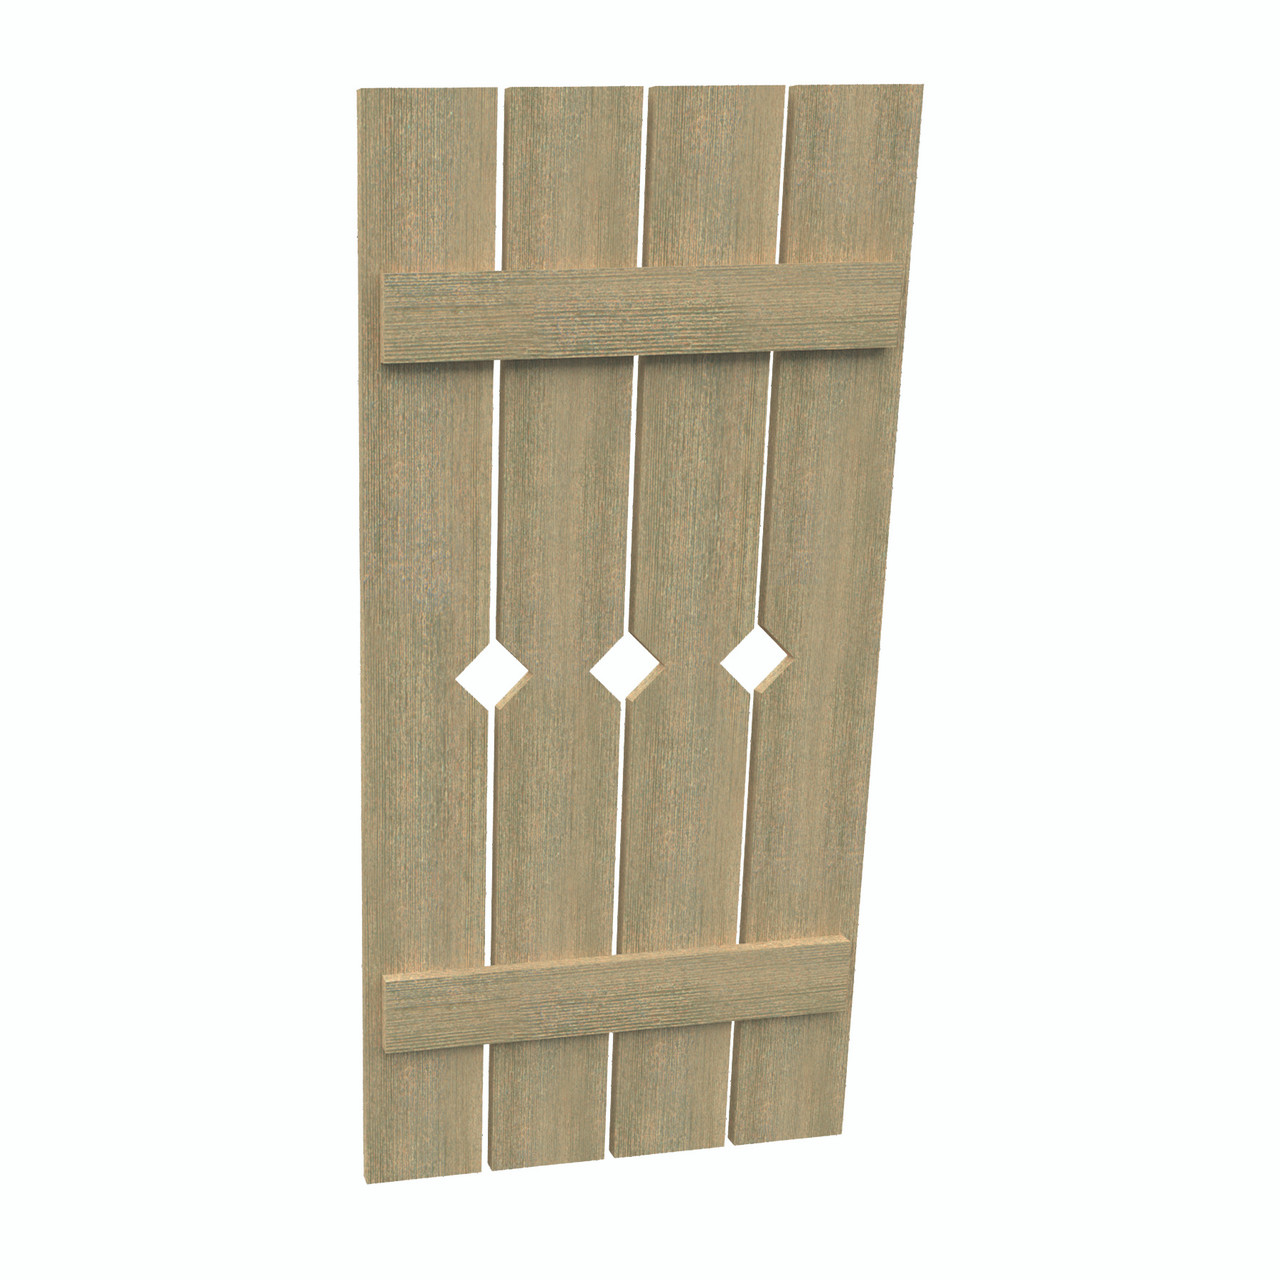 24 inch by 100 inch Plank Shutter with 4-Plank, Diamond